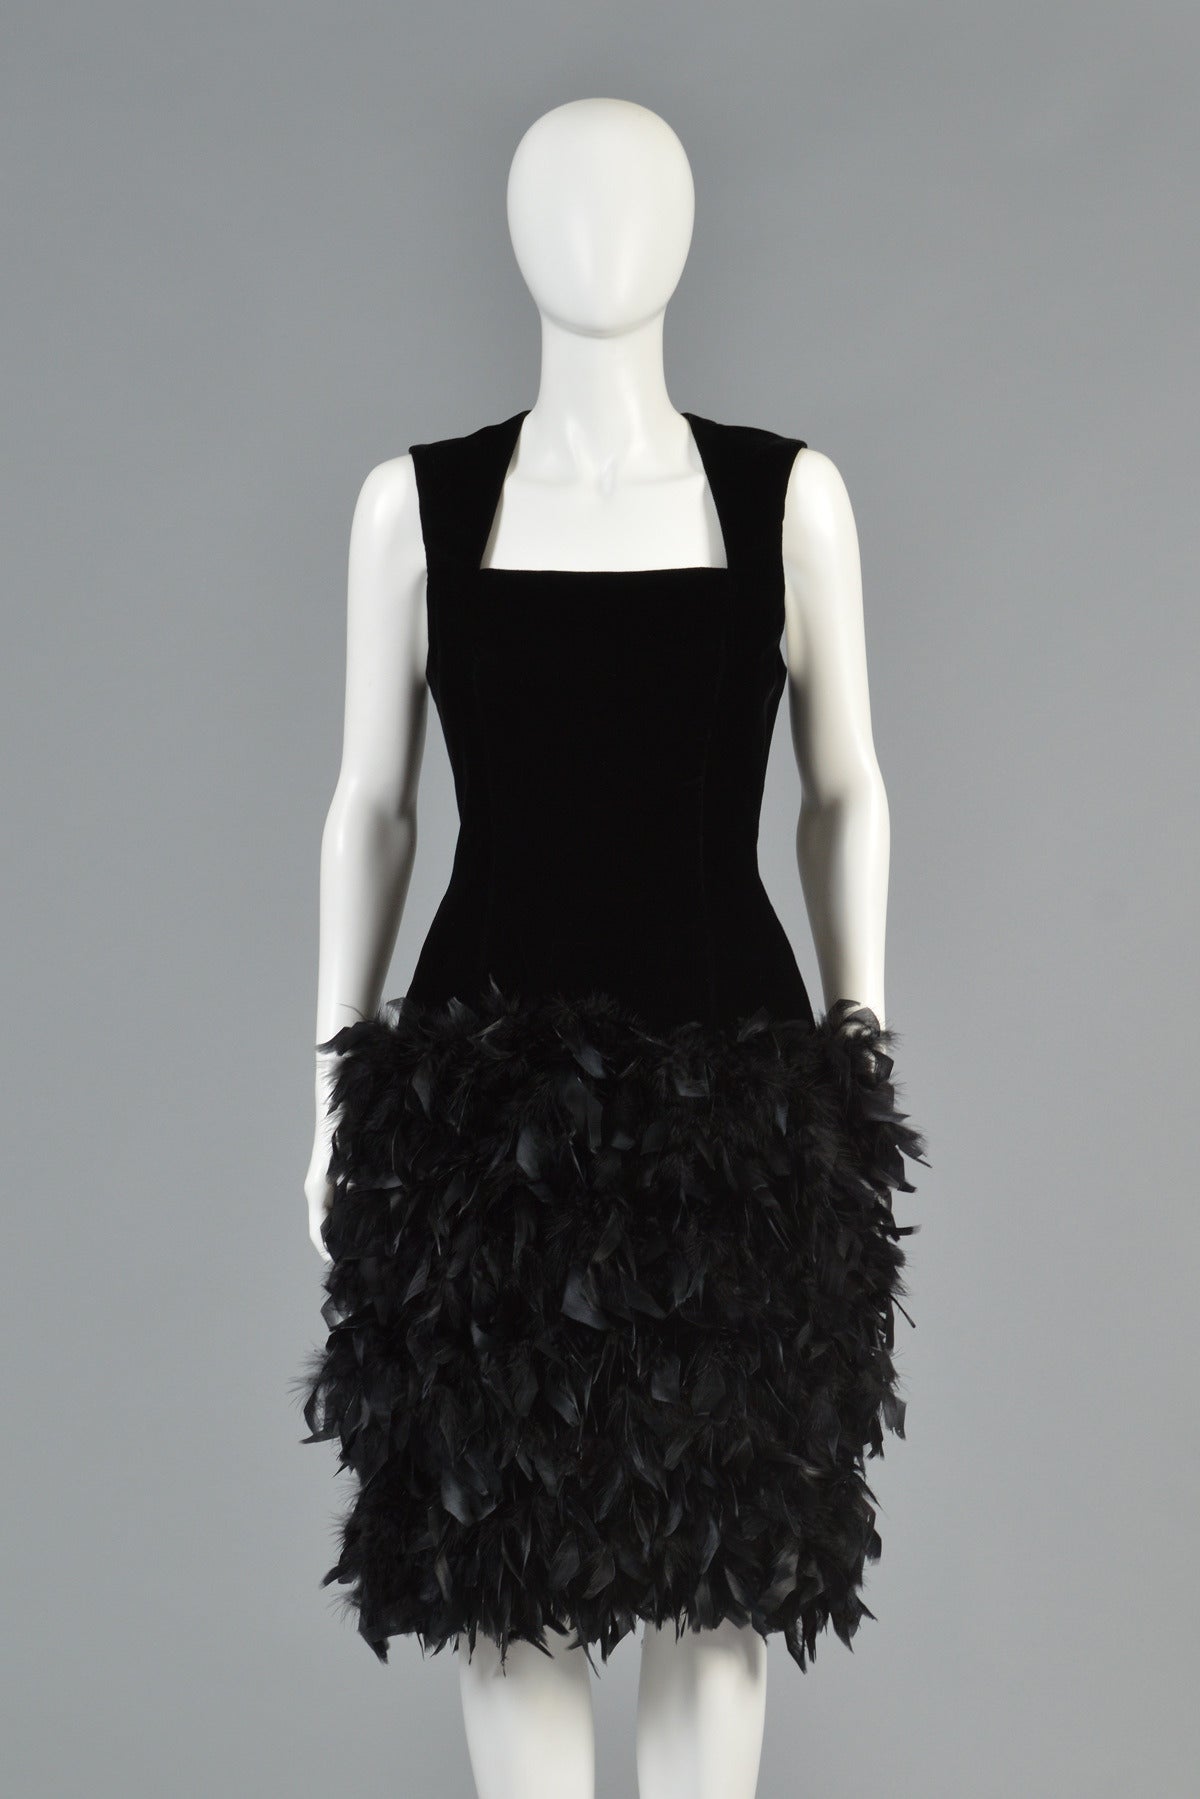 Black Velvet Cocktail Dress with Feathered Skirt In Excellent Condition For Sale In Yucca Valley, CA